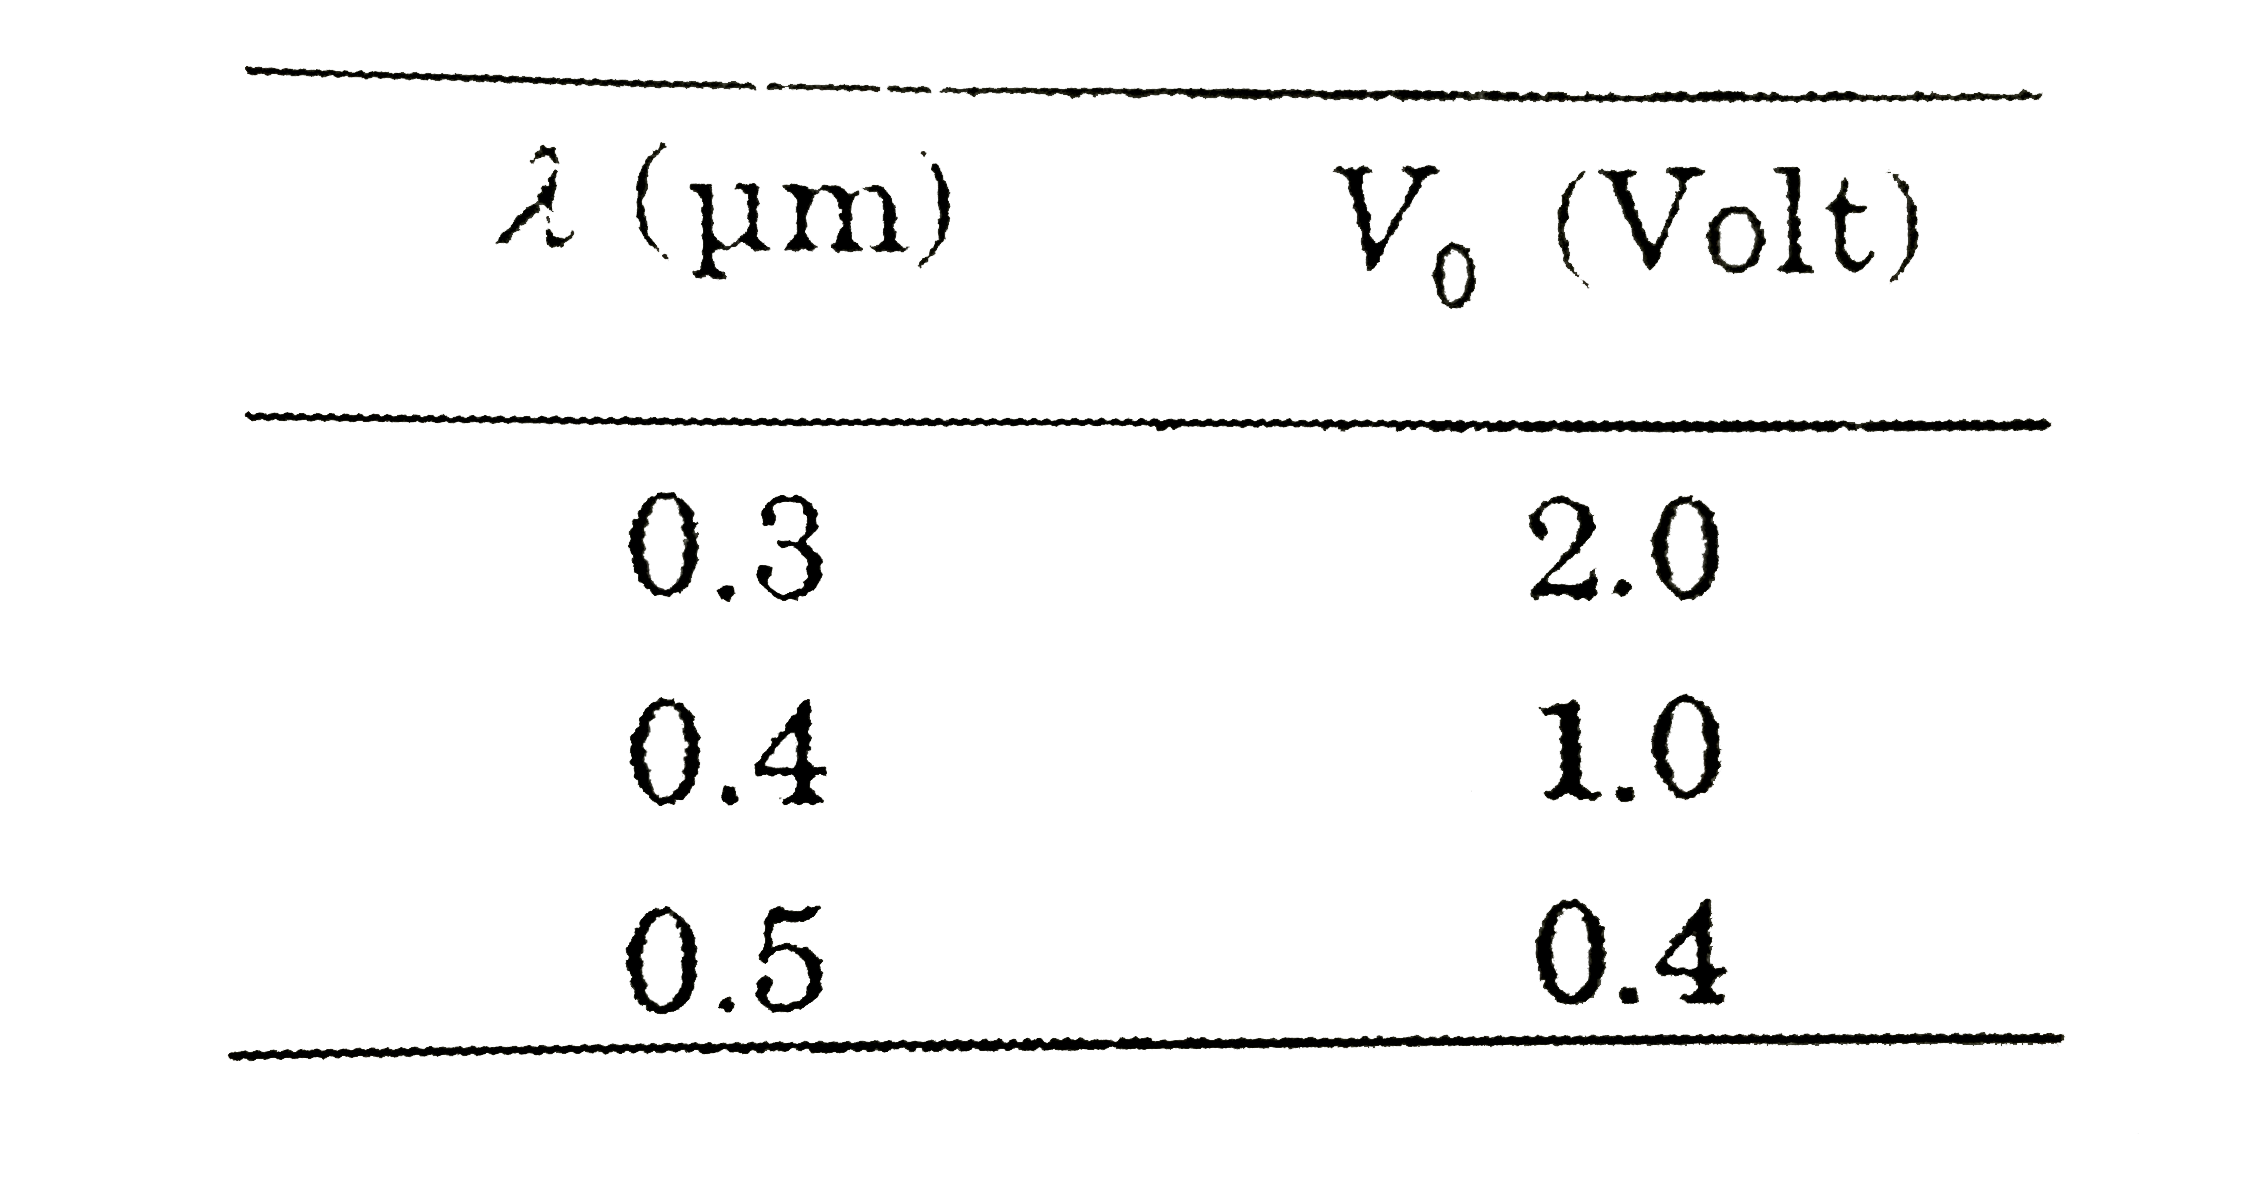 In a historical experiment to determine Planck's constant, a metal surface was irradiated with light of different wavelengths. The emitted photoelectron energies were measured by applying a stopping potential. The relevant data for the wavelength (lambda). ) of incident light and the corresponding stopping potential (V0 ) are given below :      Given that c=3xx10^8ms^(-1) and e=1.6xx10^(-19)C Planck's constant (in units of J s) found from such an experiment is